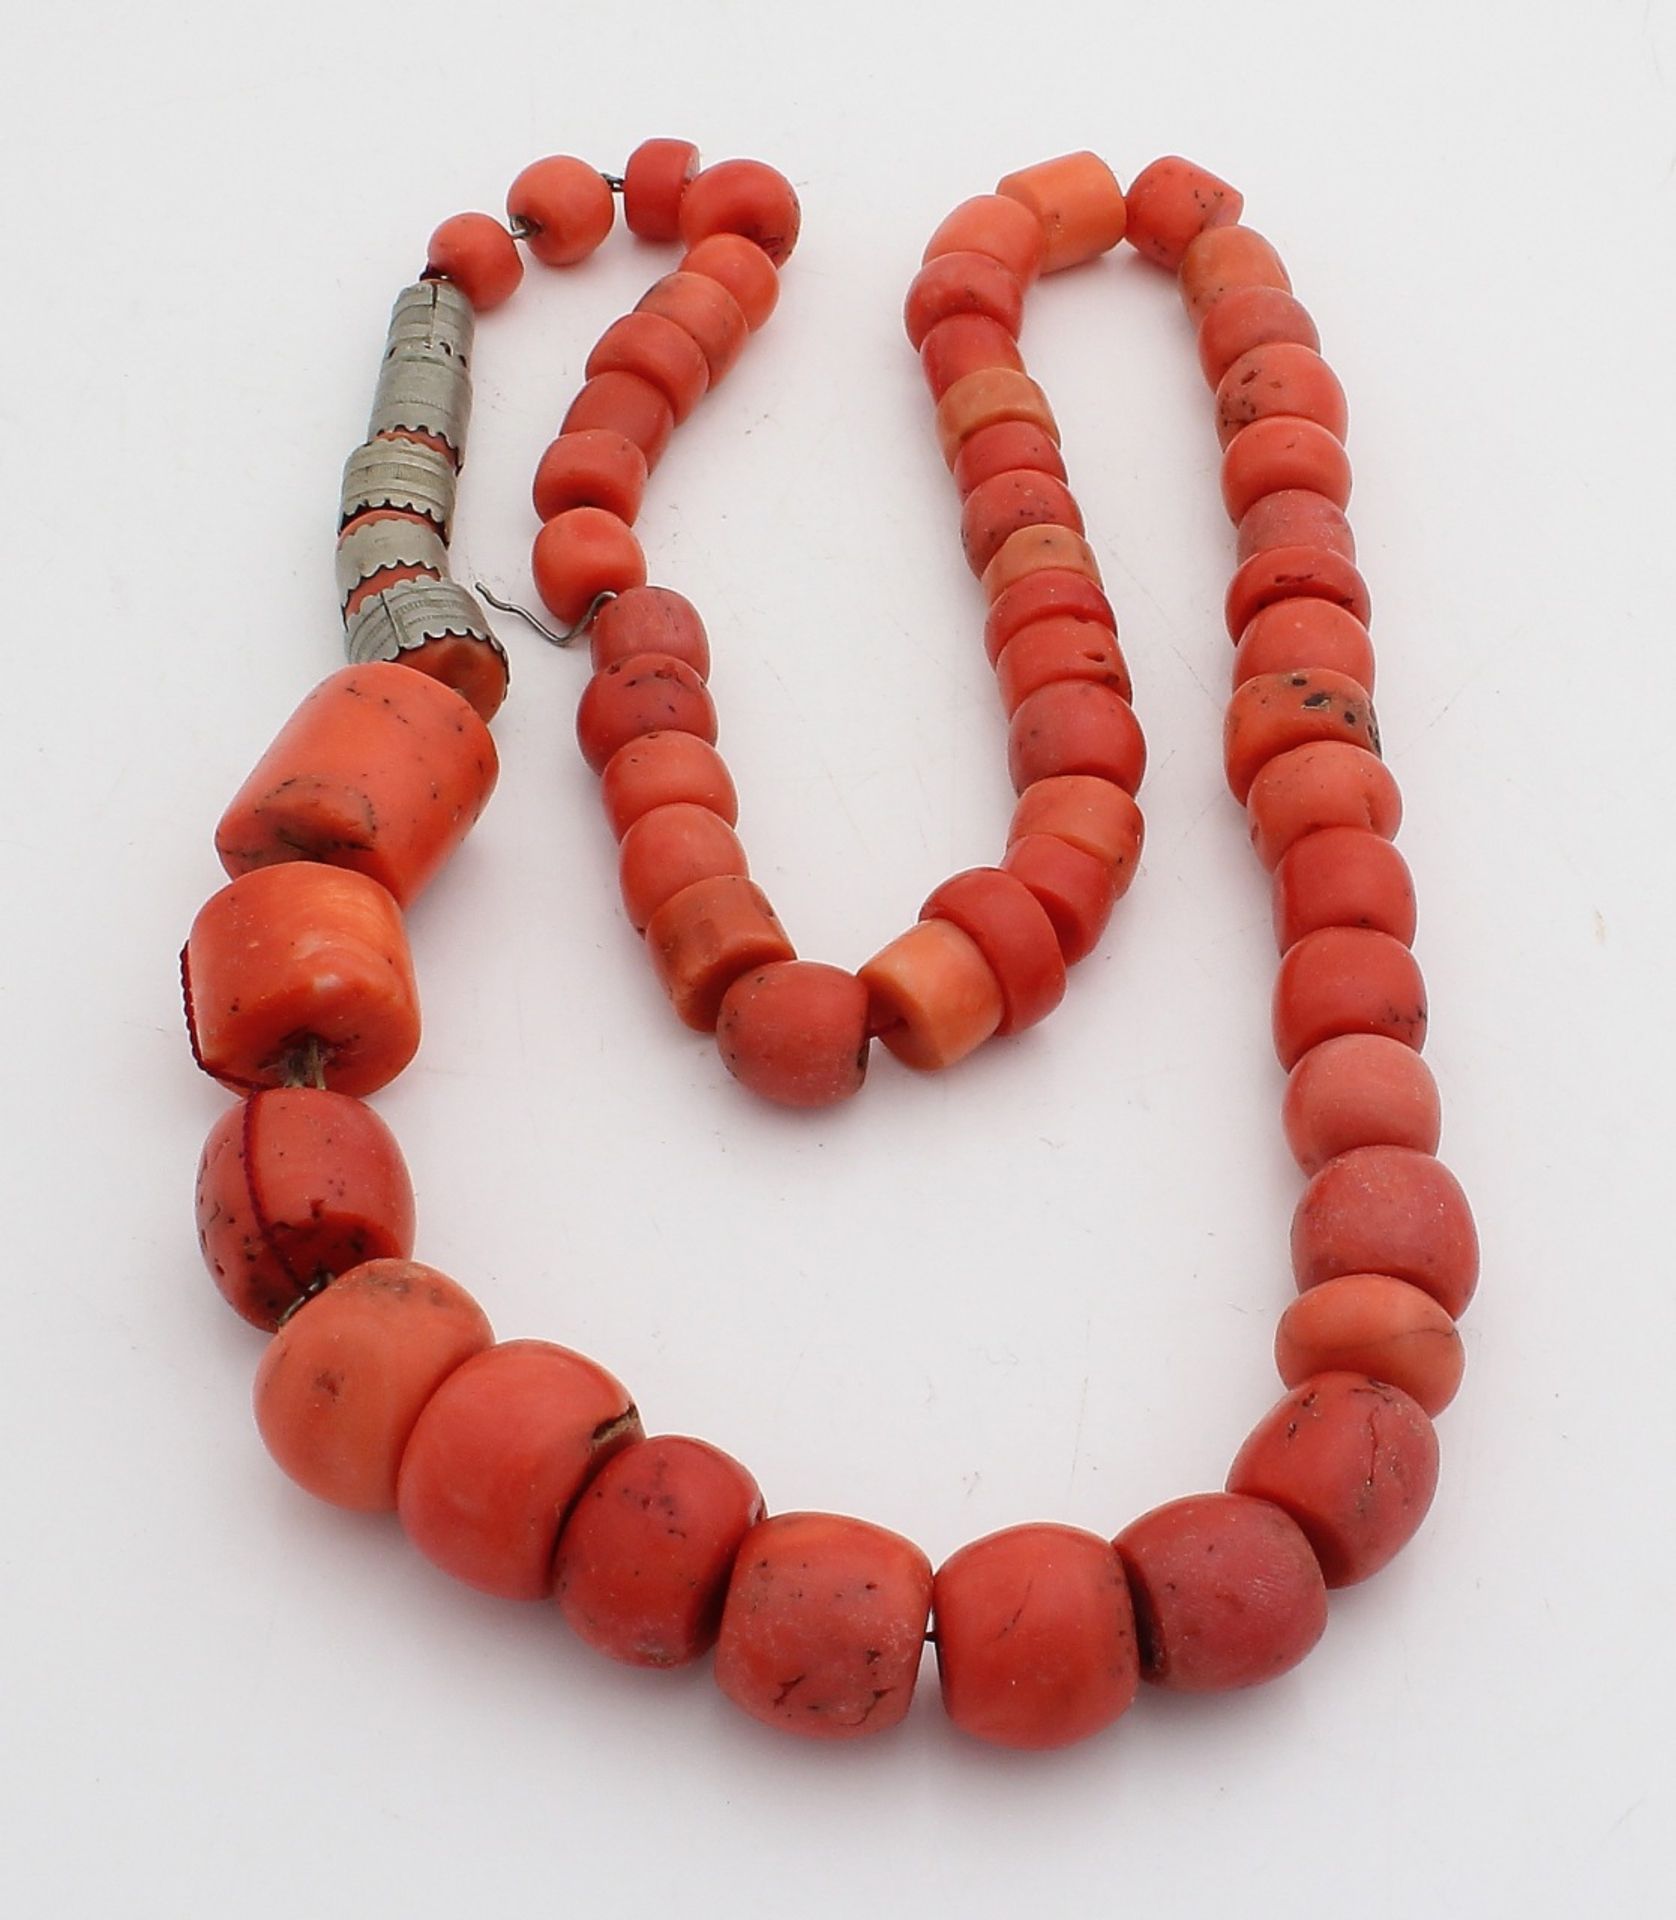 Special necklace of red coral, extending by 5 beads wrapped with metal. Size 8x6-11x11 mm. Length 59